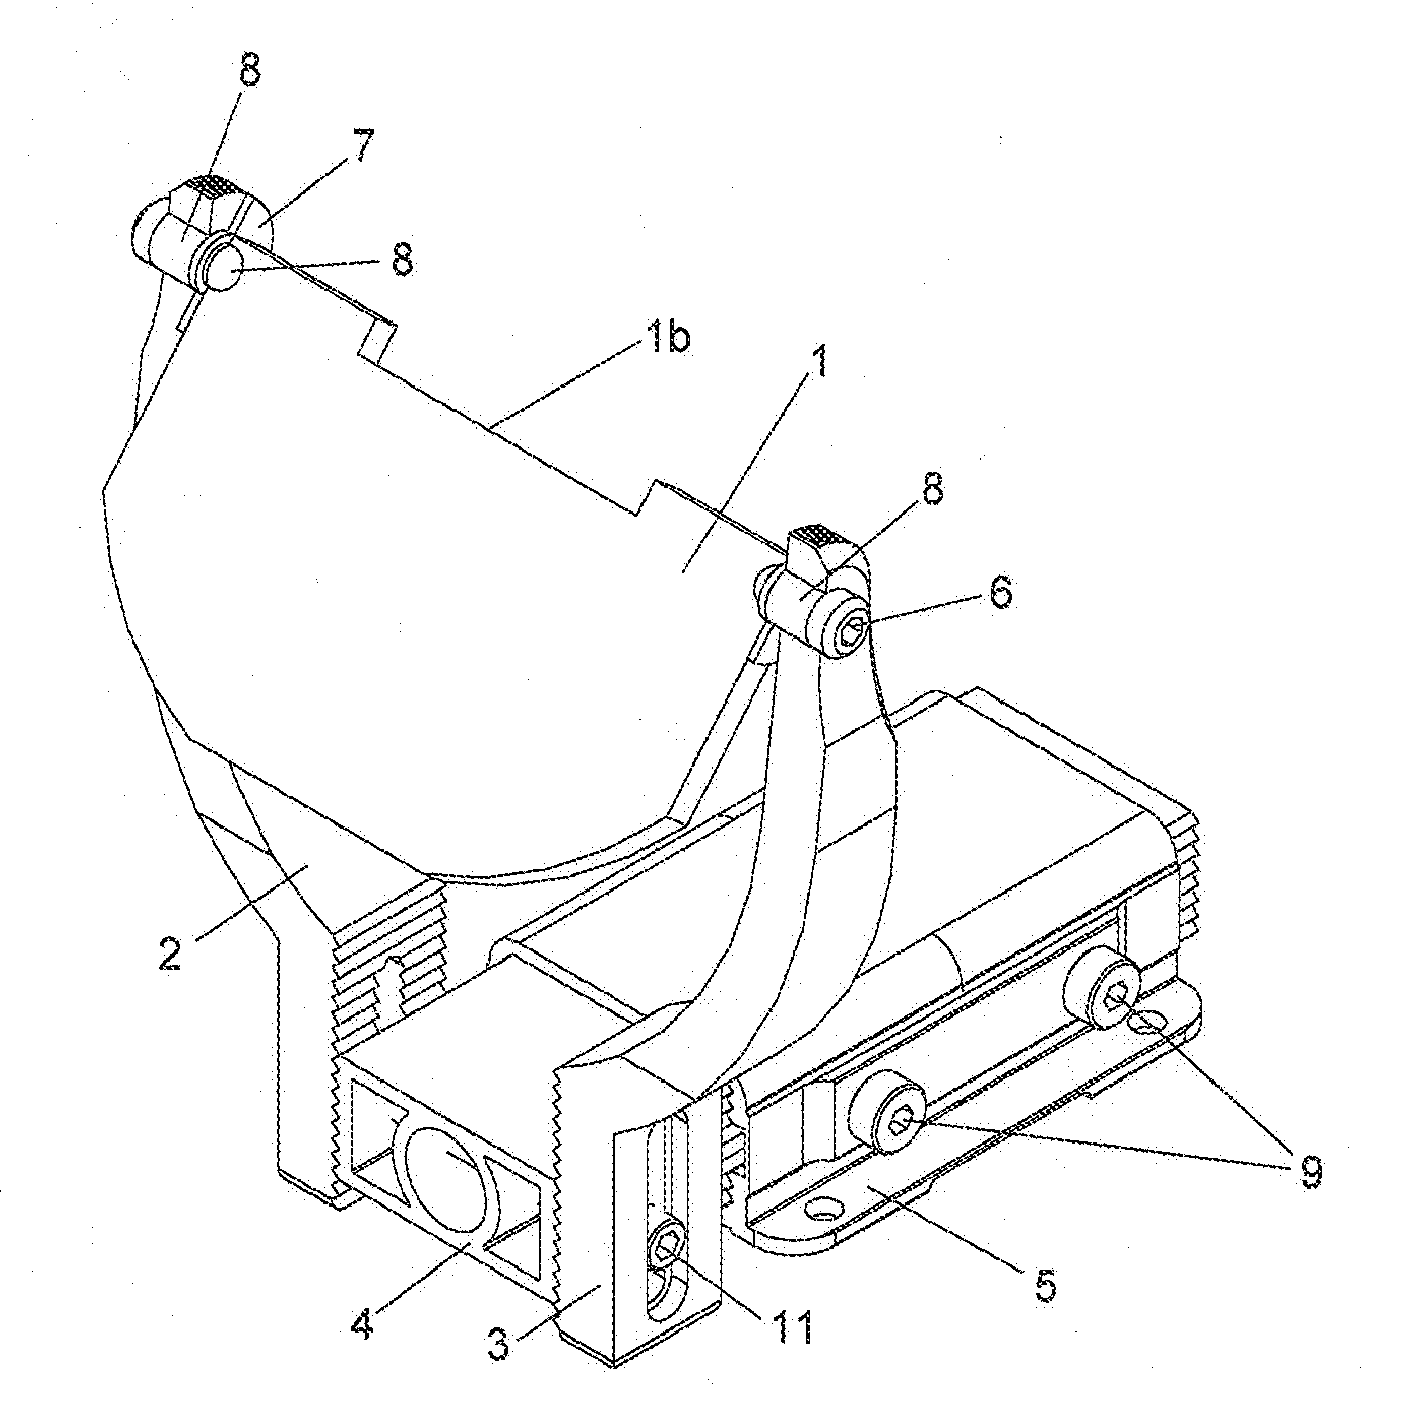 Adjustable Grinding Platform and Mounting Assembly